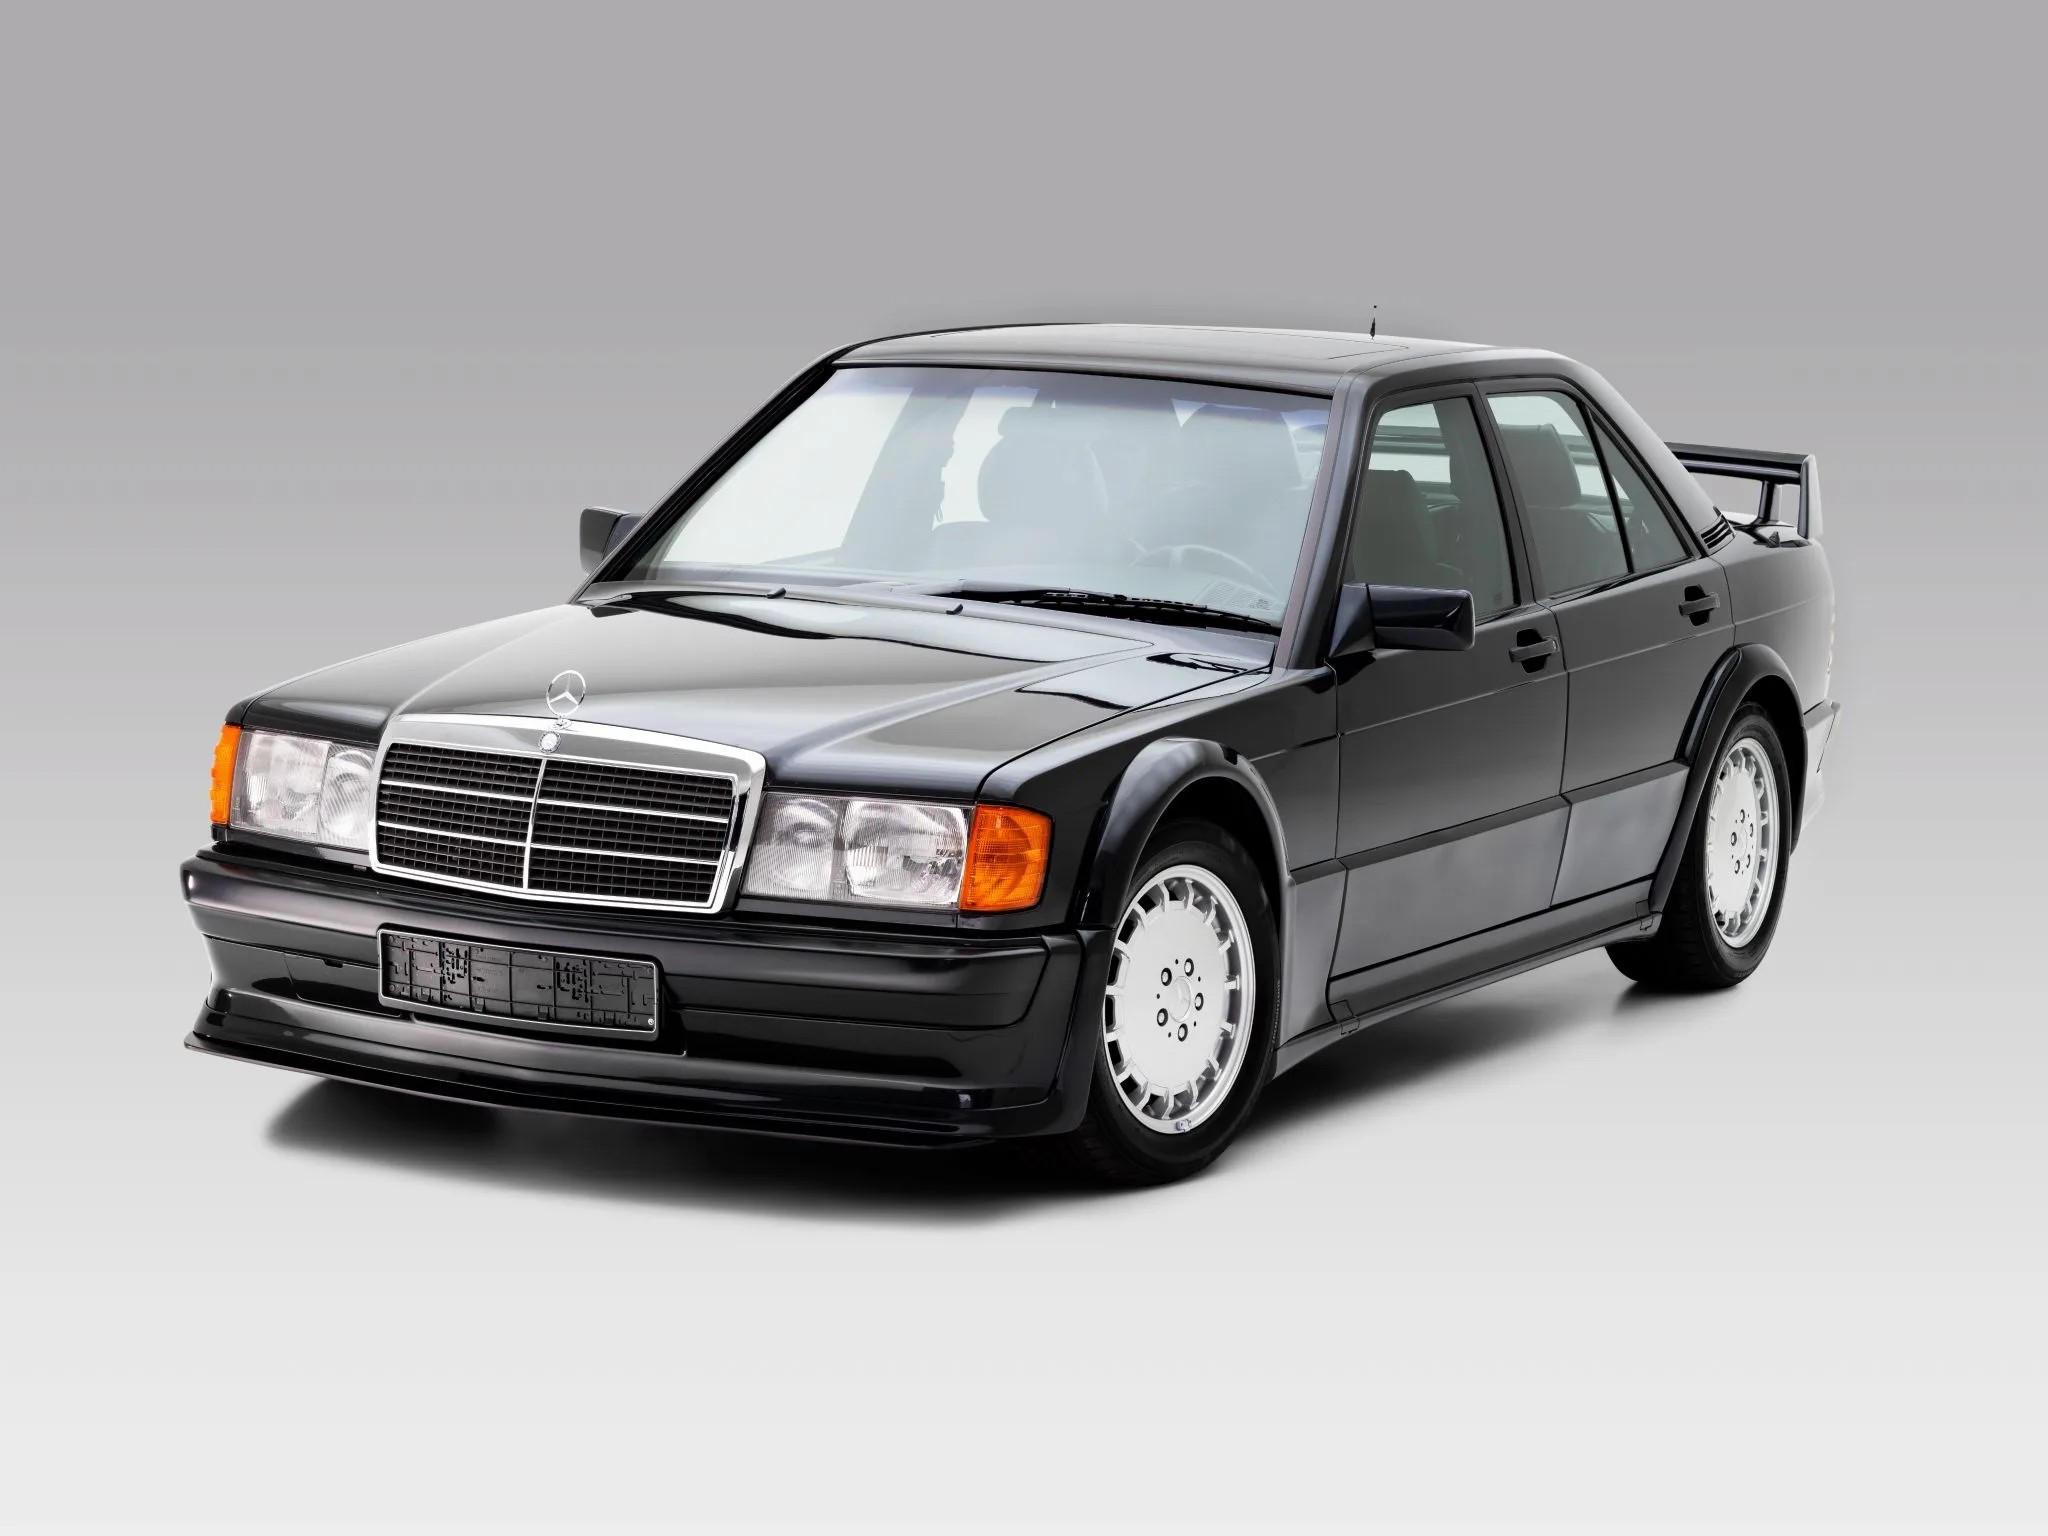 1989 Mercedes-Benz 190E 2.5–16 Evolution I Is a Time Capsule from